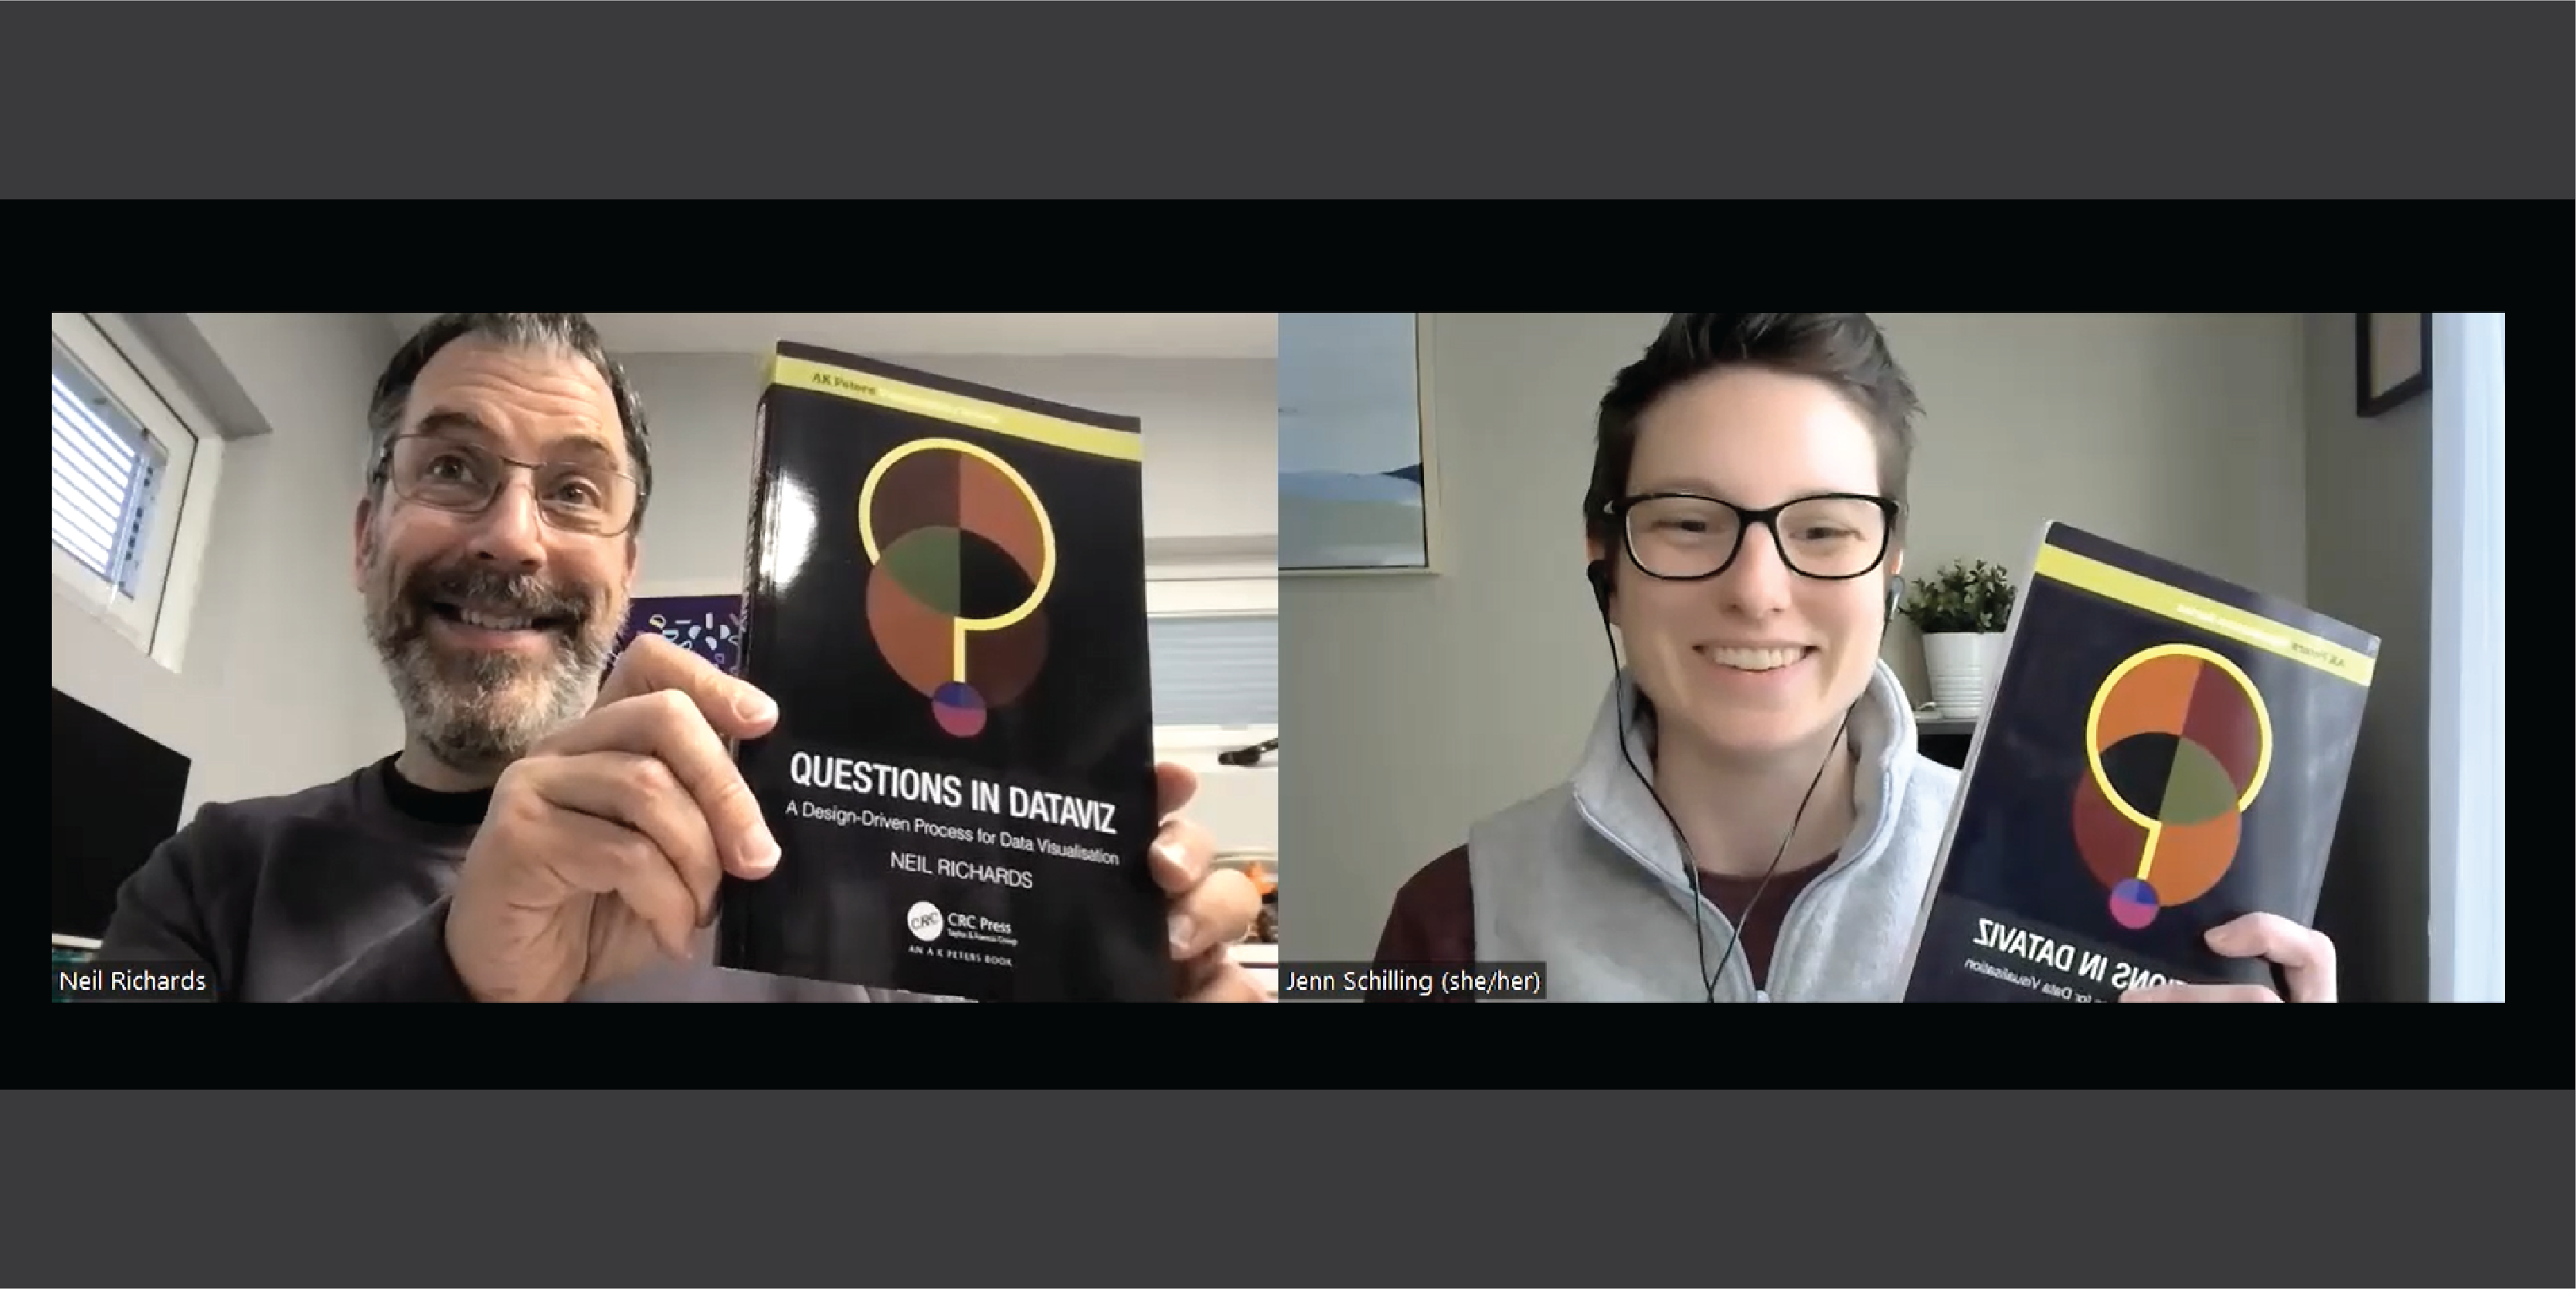 A screenshot of a video meeting between Neil Richards (a man with short dark hair, glasses, and a gray and black beard) and Jenn Schilling (a woman with short brown hair and glasses). Both Neil and Jenn are smiling and holding up their copies of the book Questions in Dataviz.